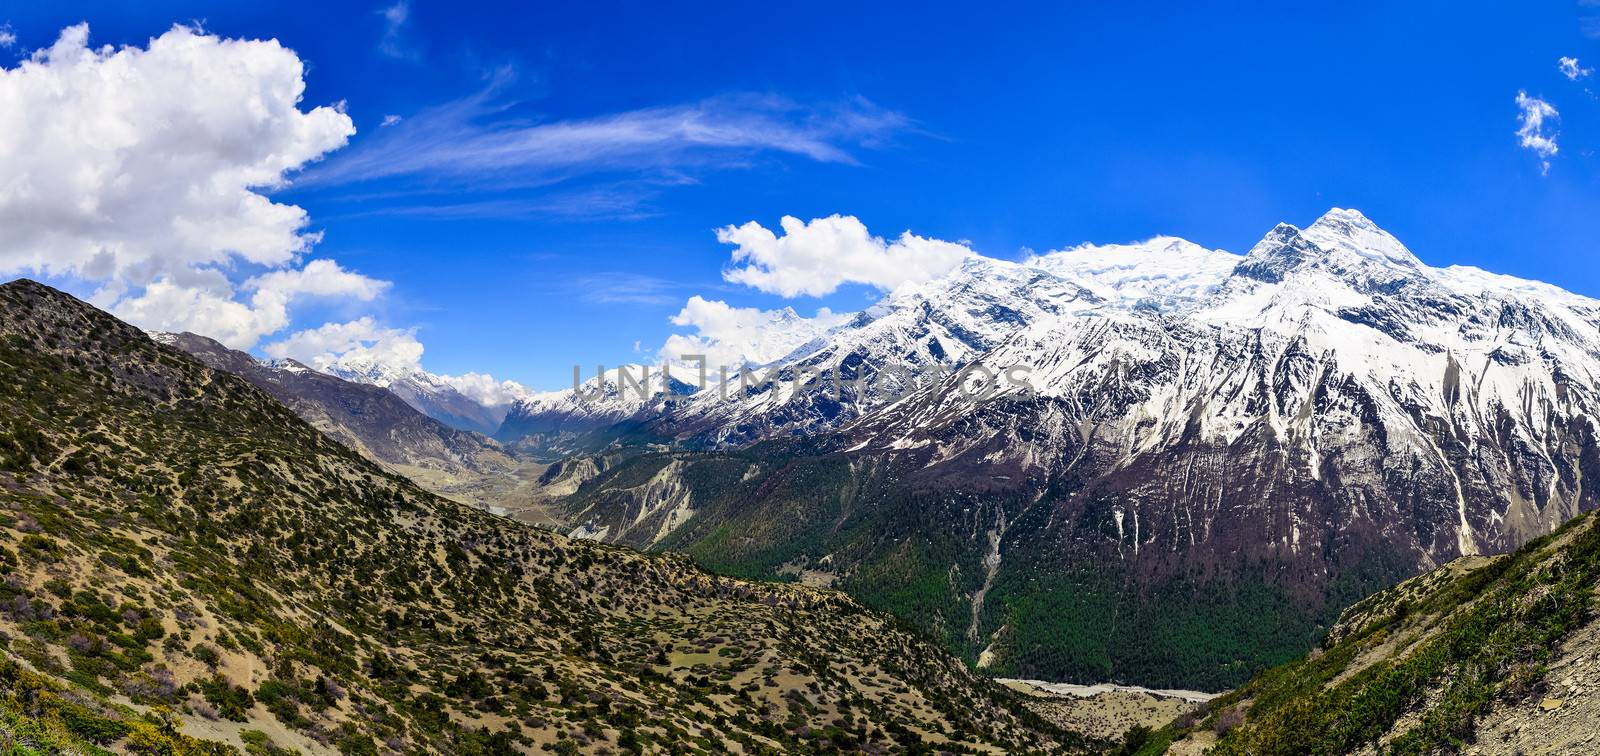 Himalayas mountains valley panorama by martinm303